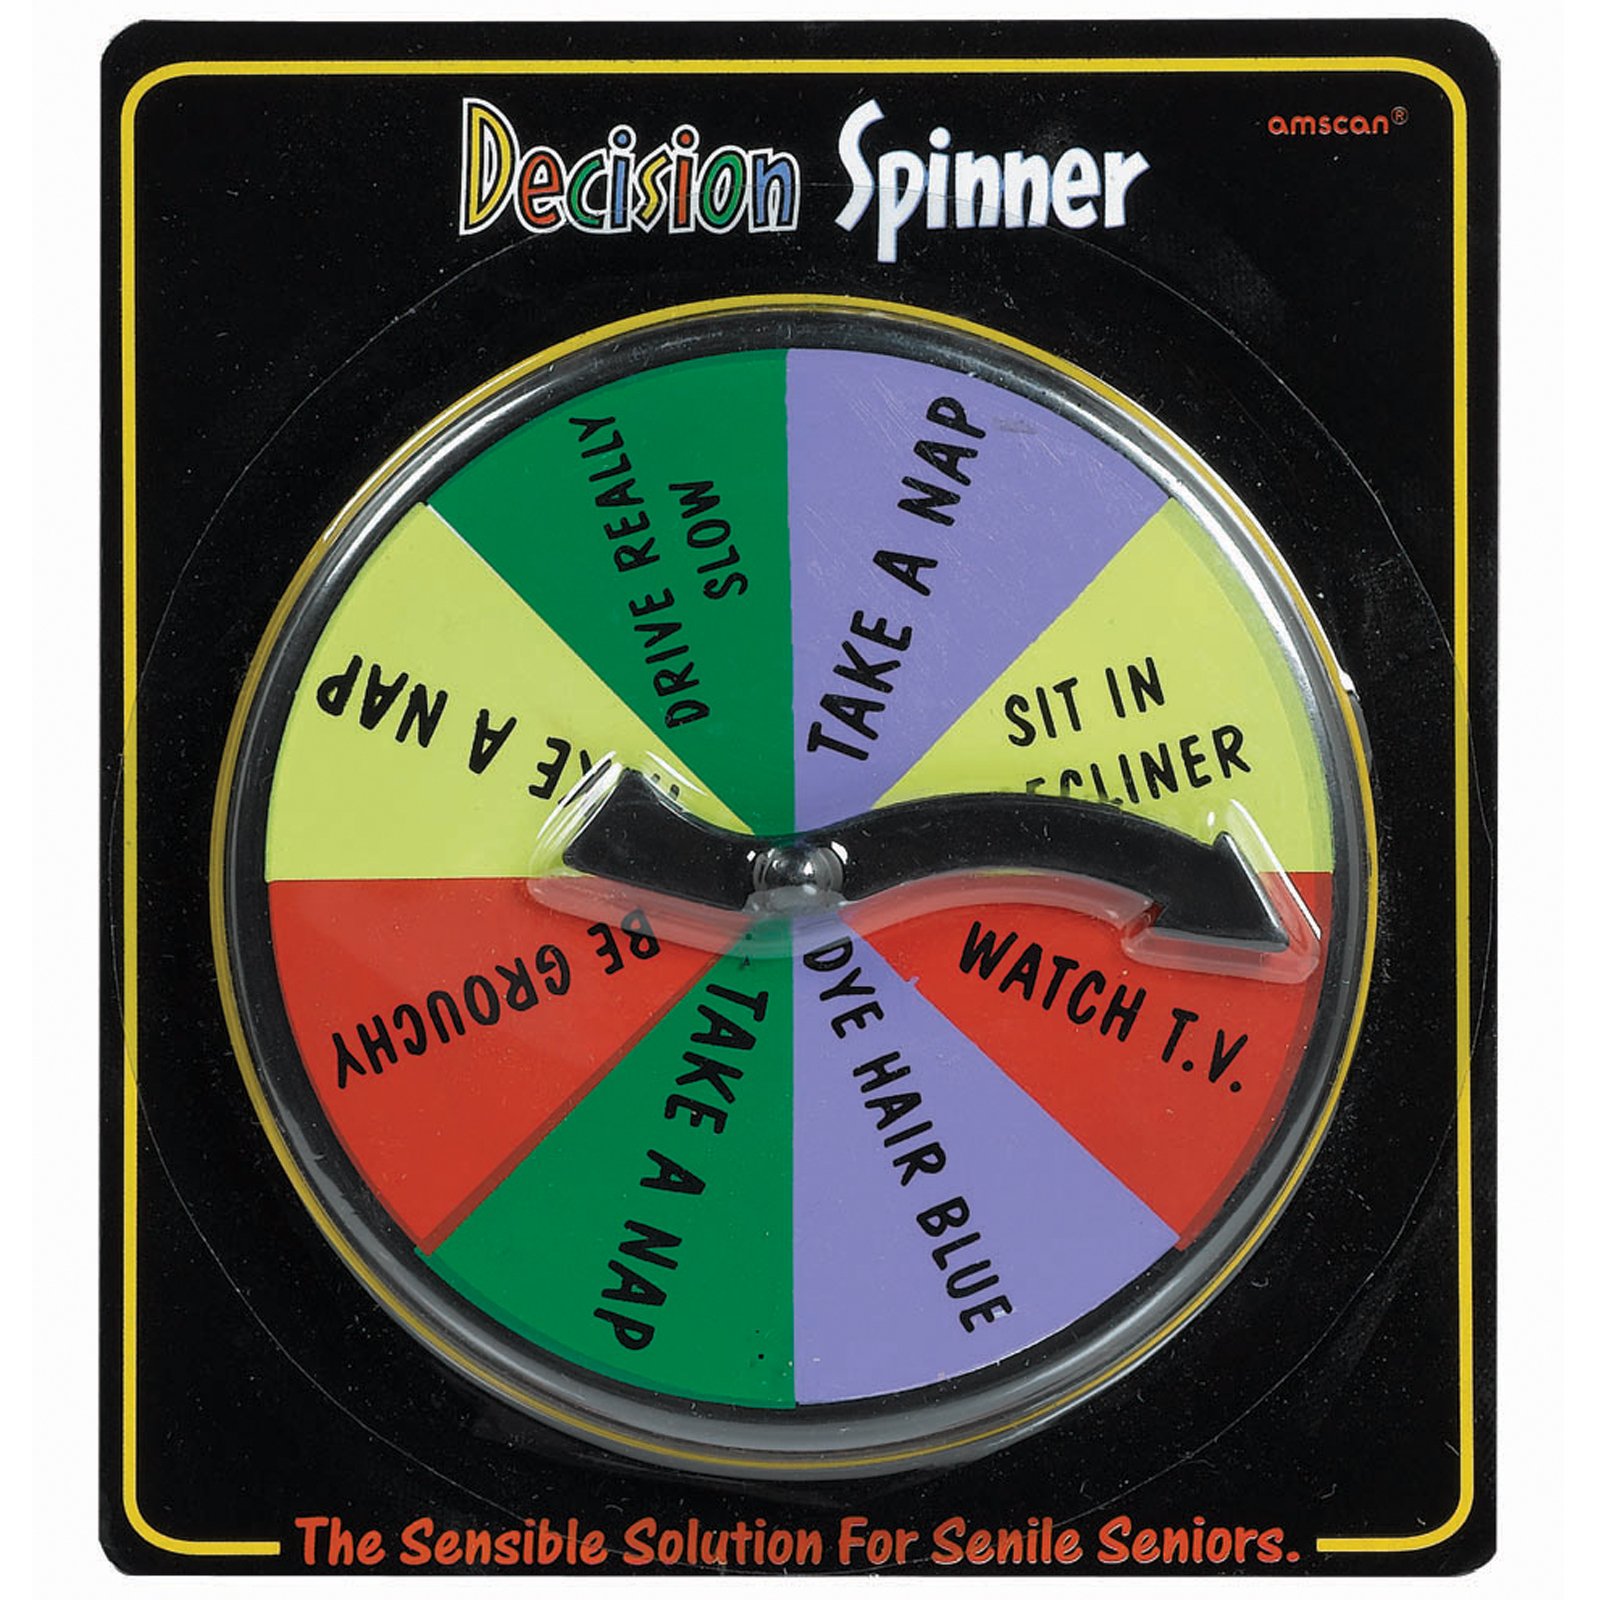 Over the Hill Decision Spinner